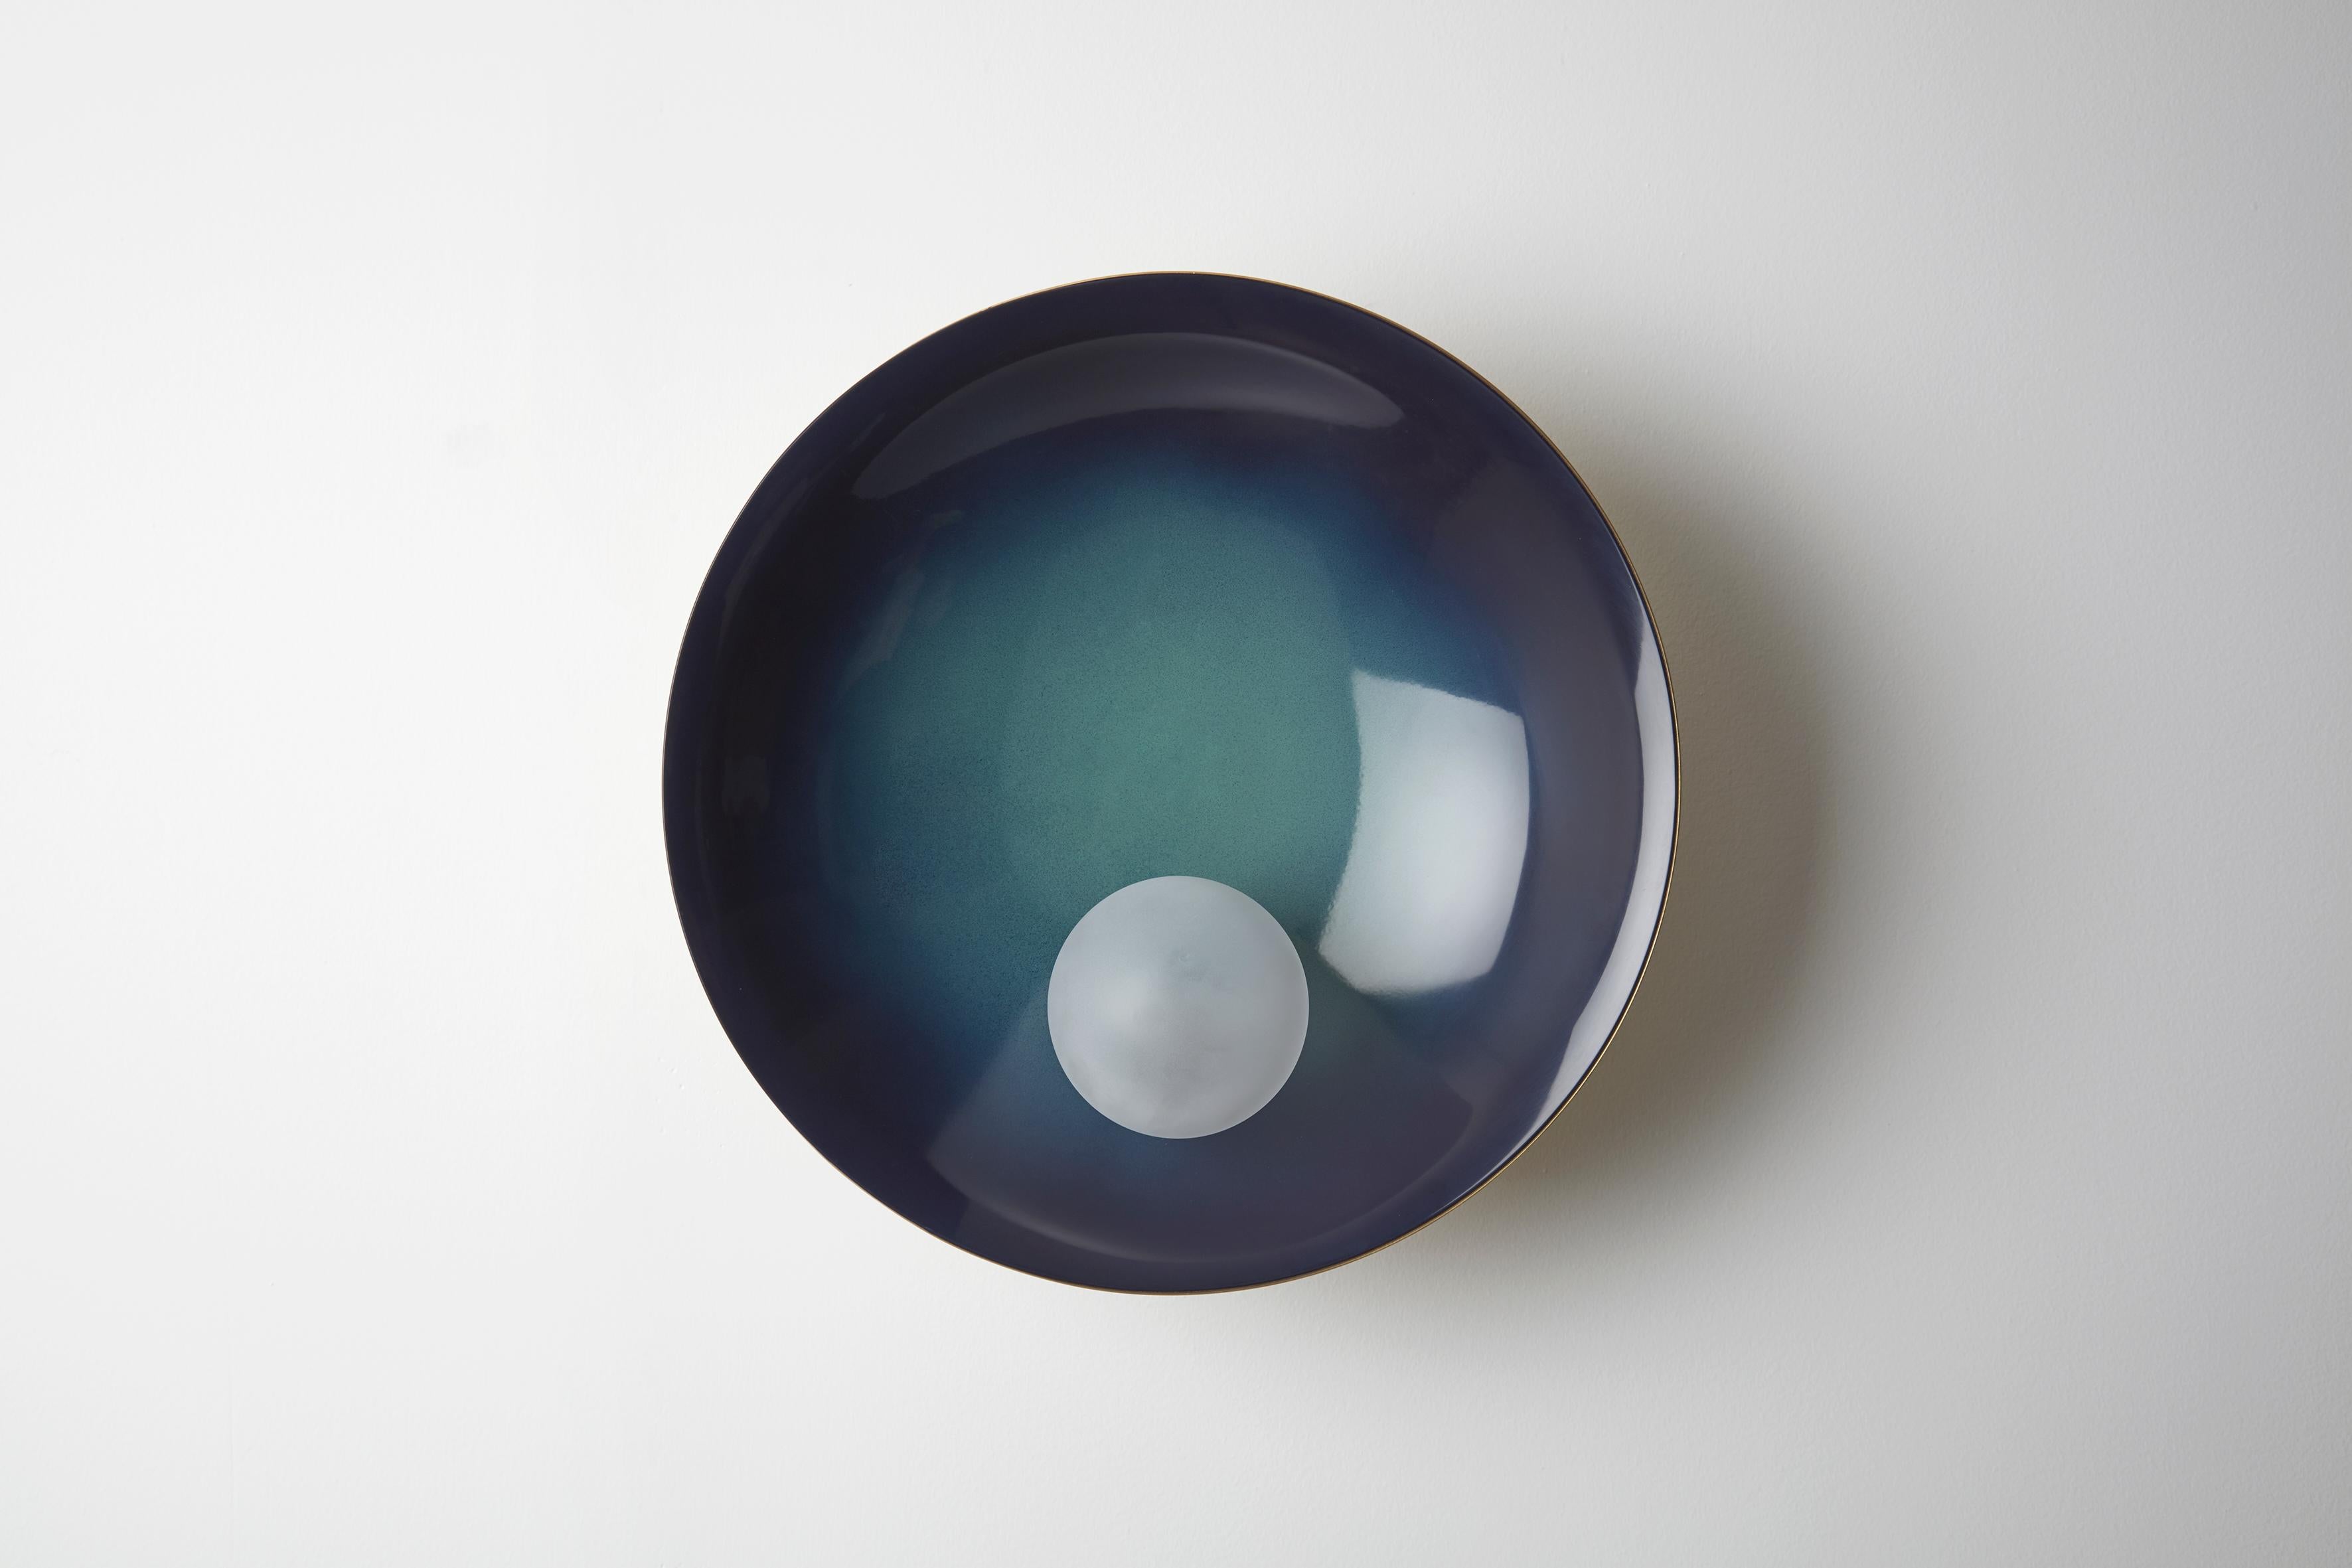 Oyster wall-ceiling mounted midnight blue, Carla Baz
Dimensions: ø 40 x D 18 
Weight: 3.5 kg
Material: Brass, blown satin glass globes

Oyster is a series of sculptural lighting pieces that were developed in 2016. Wanting to explore the IDEA of